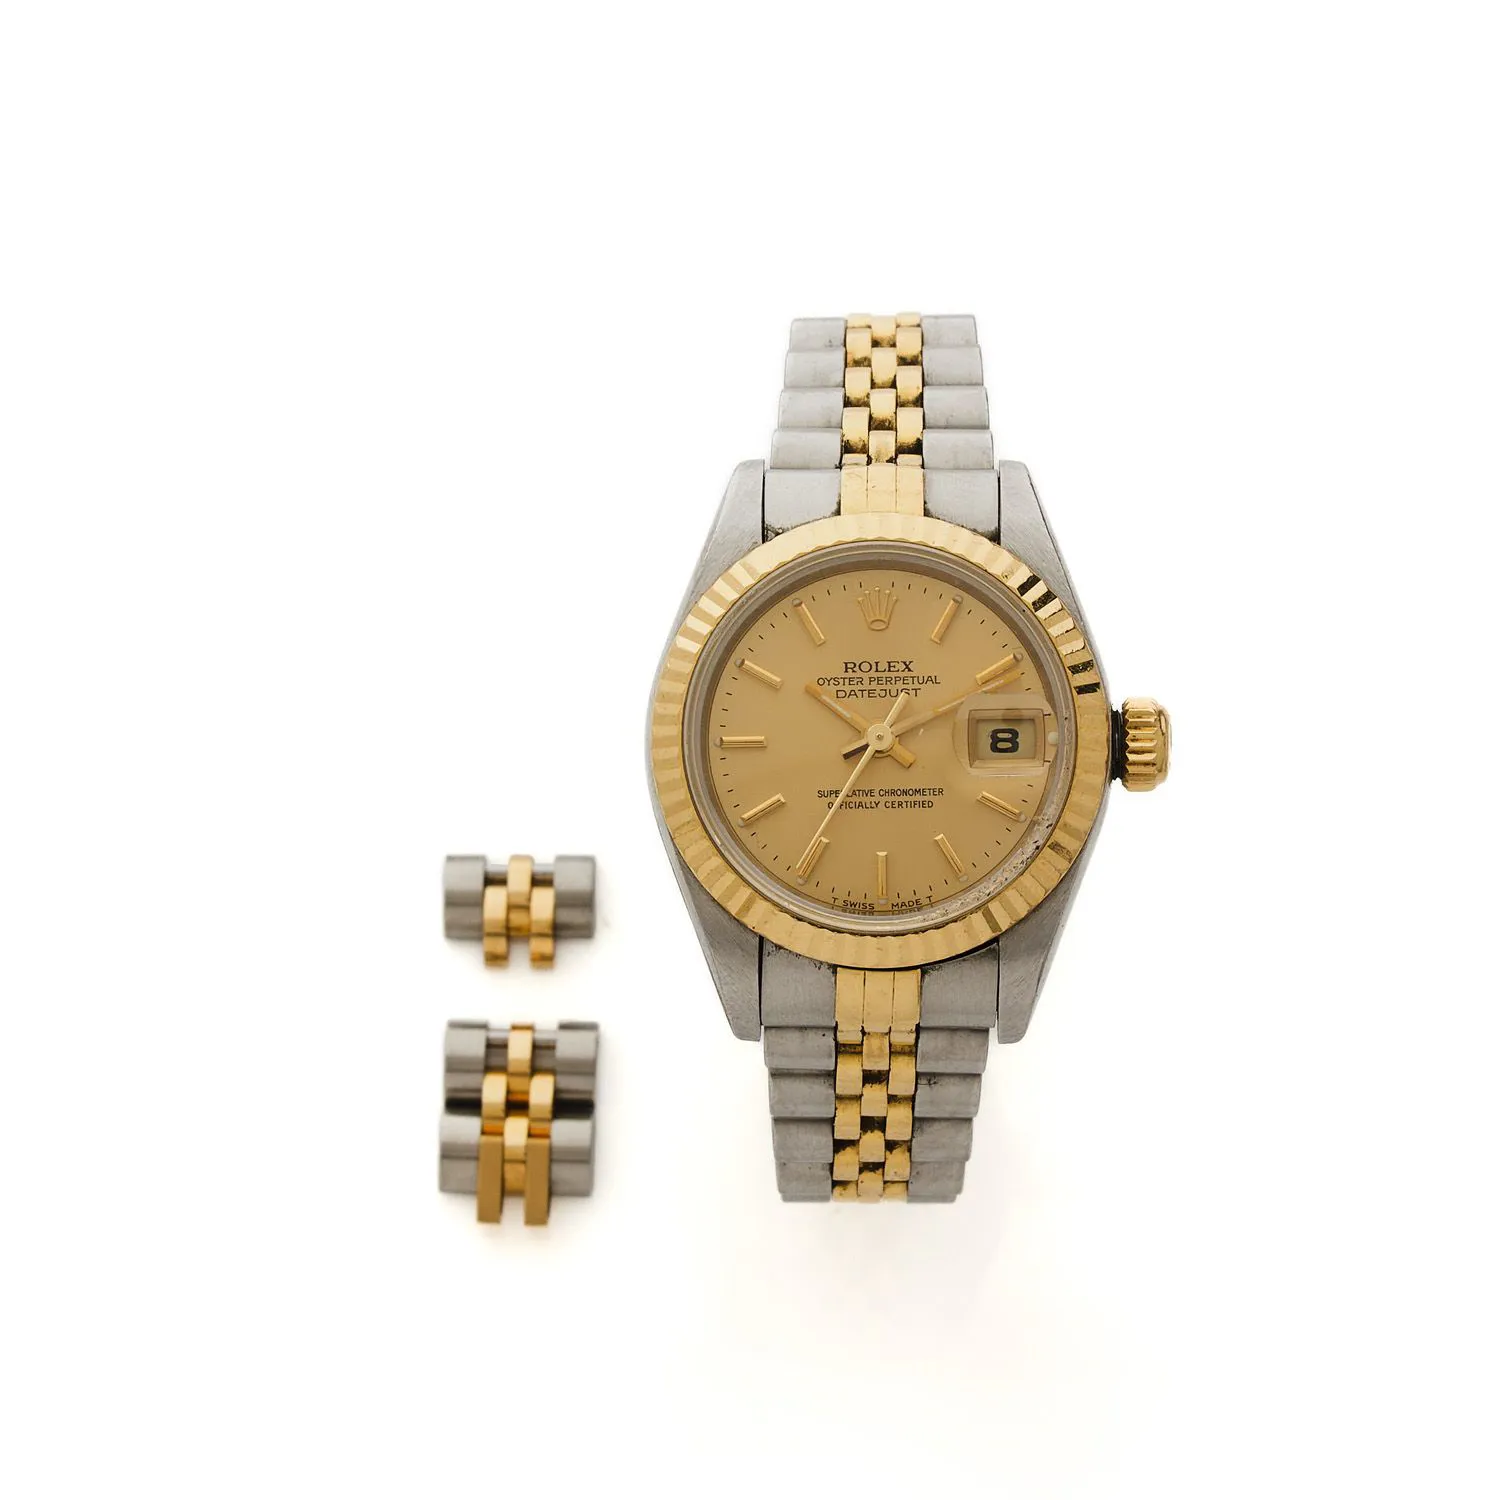 Rolex Lady-Datejust 69173 26mm Yellow gold and stainless steel Gilt